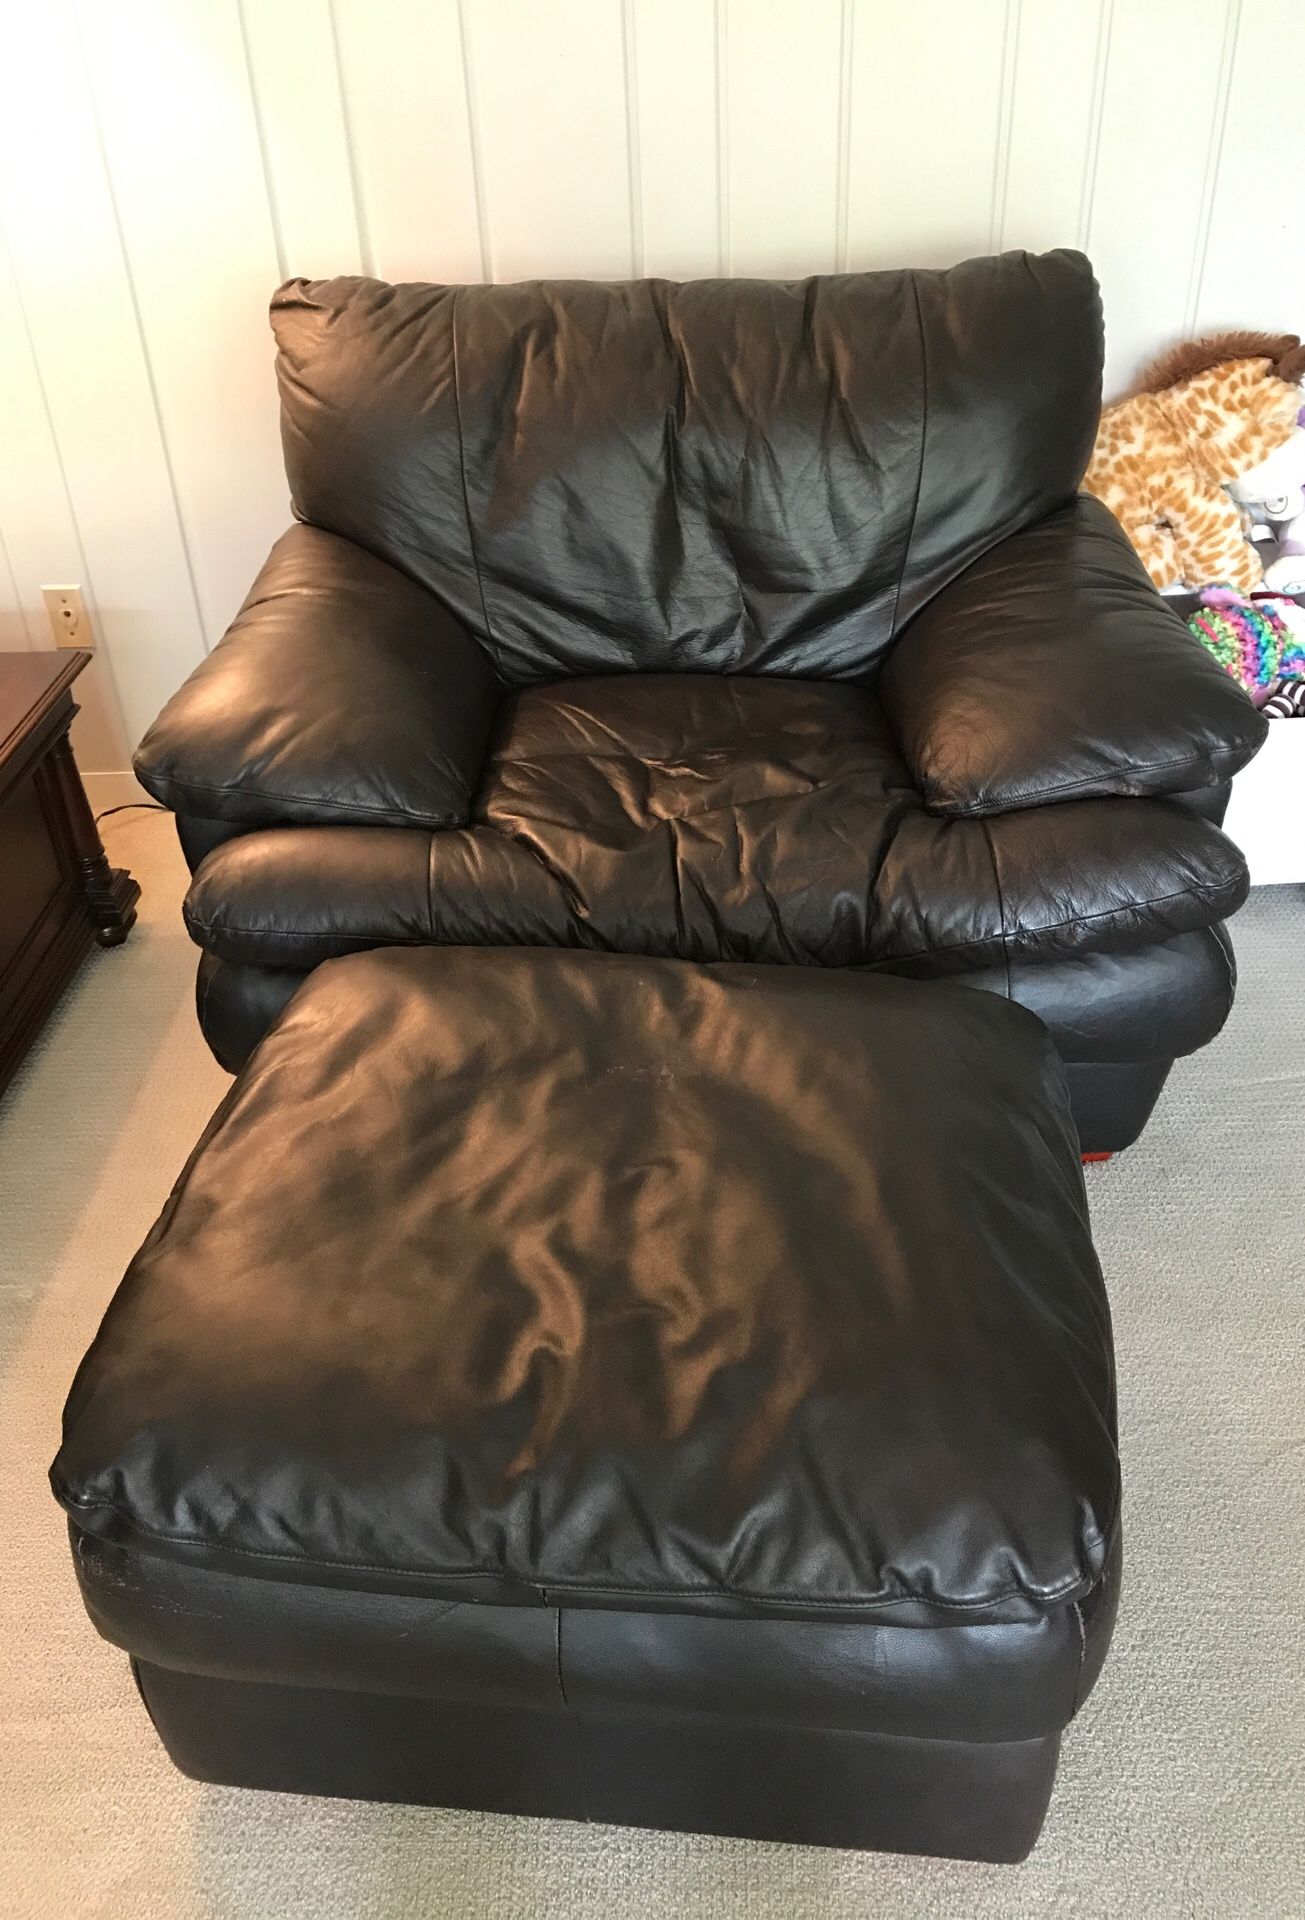 ***FREE*** BROWN LEATHER CHAIR AND OTTOMAN